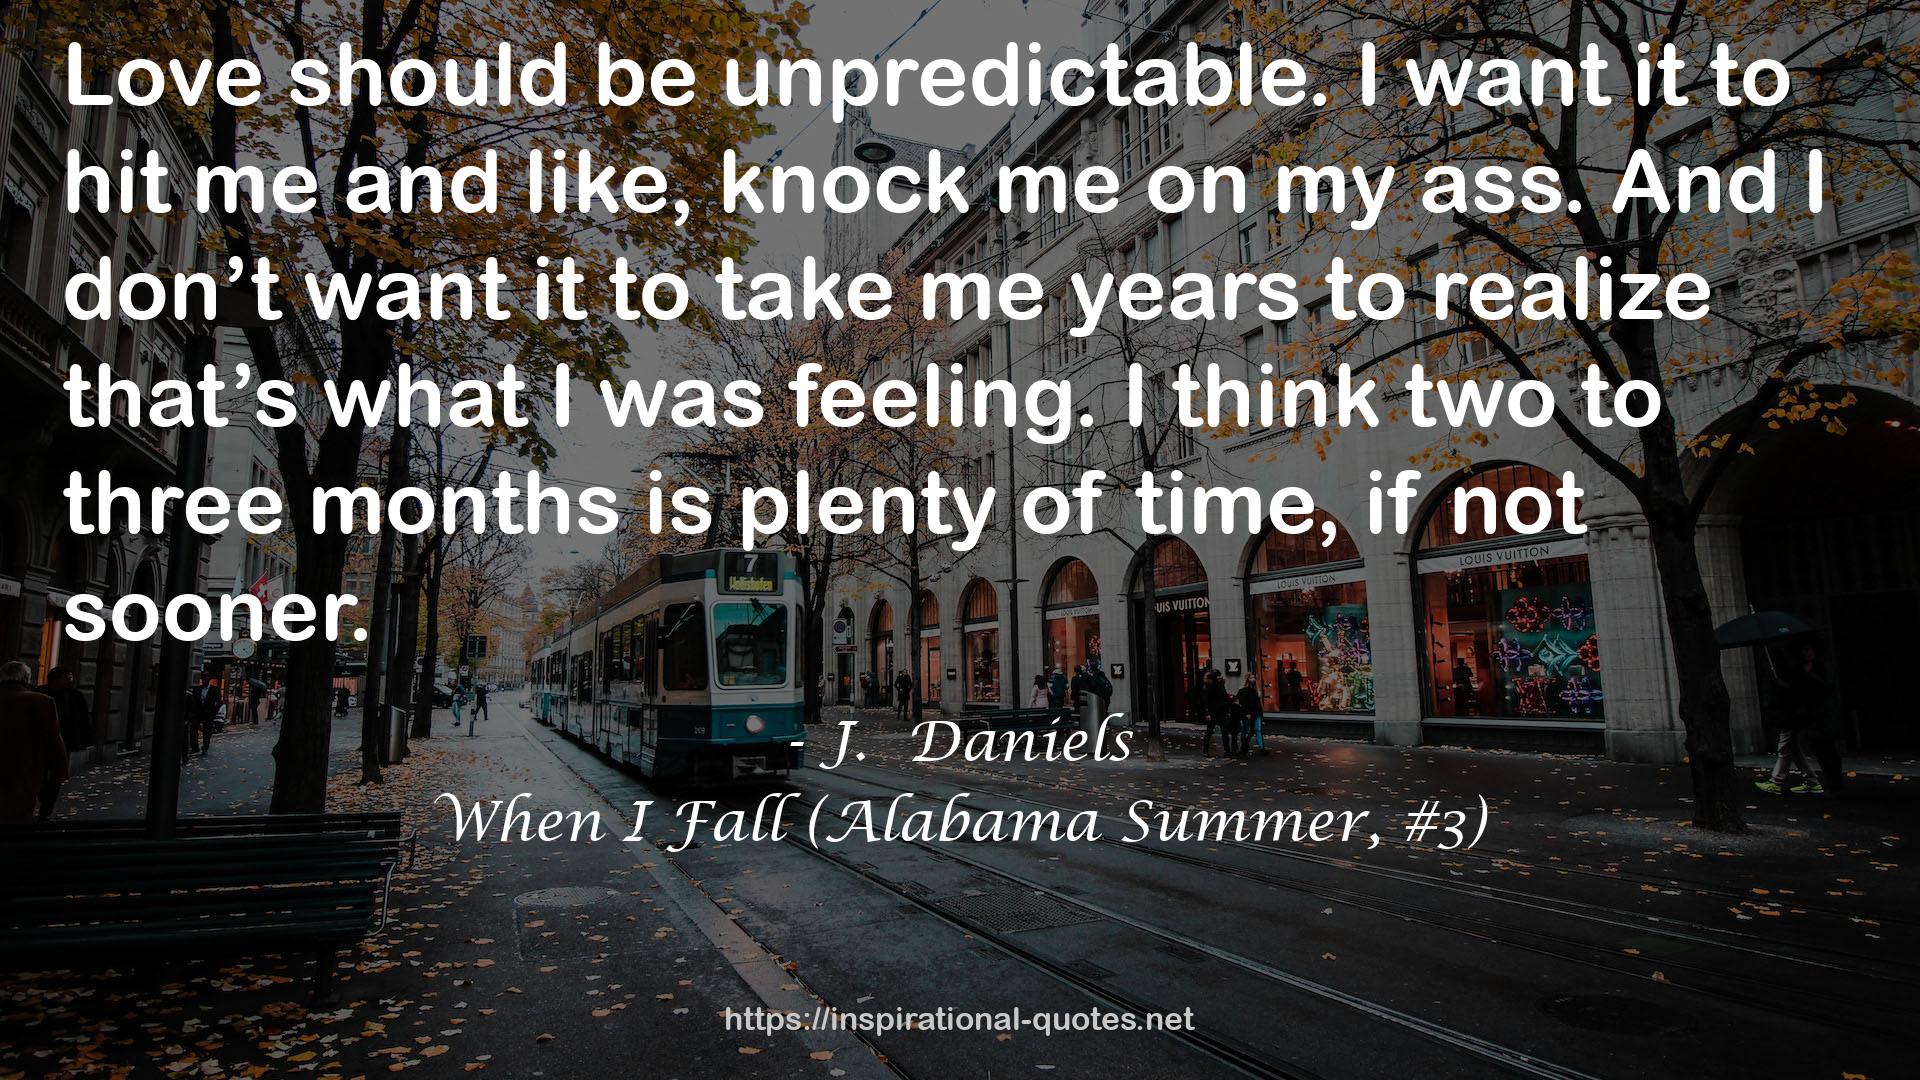 When I Fall (Alabama Summer, #3) QUOTES